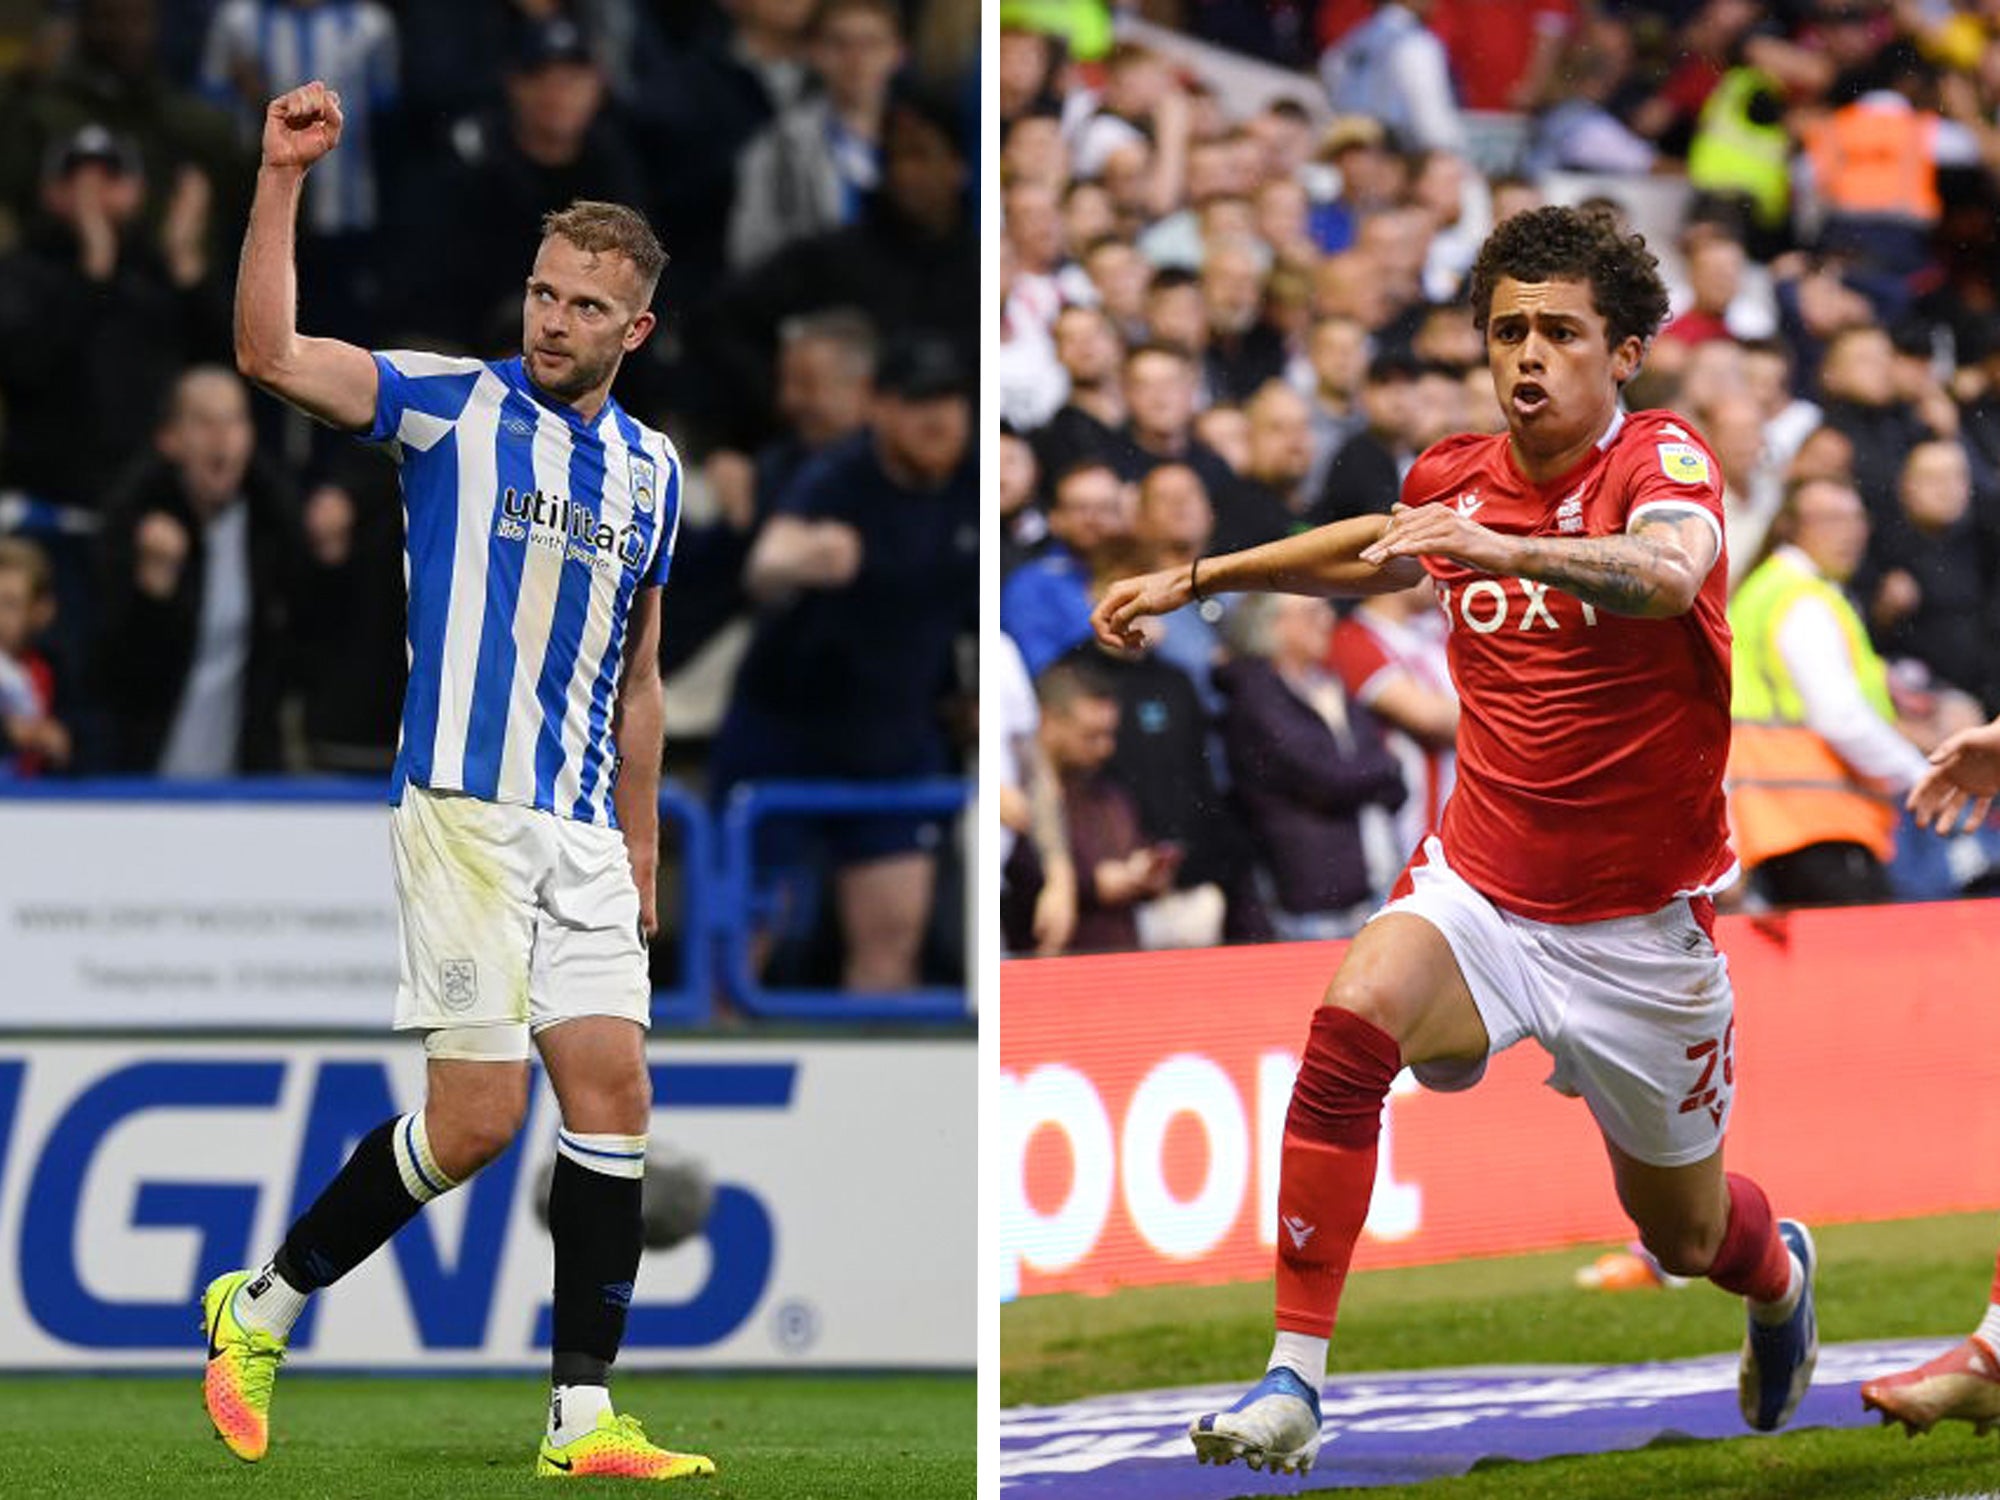 Huddersfield Town face Nottingham Forest in the Championship play-off final